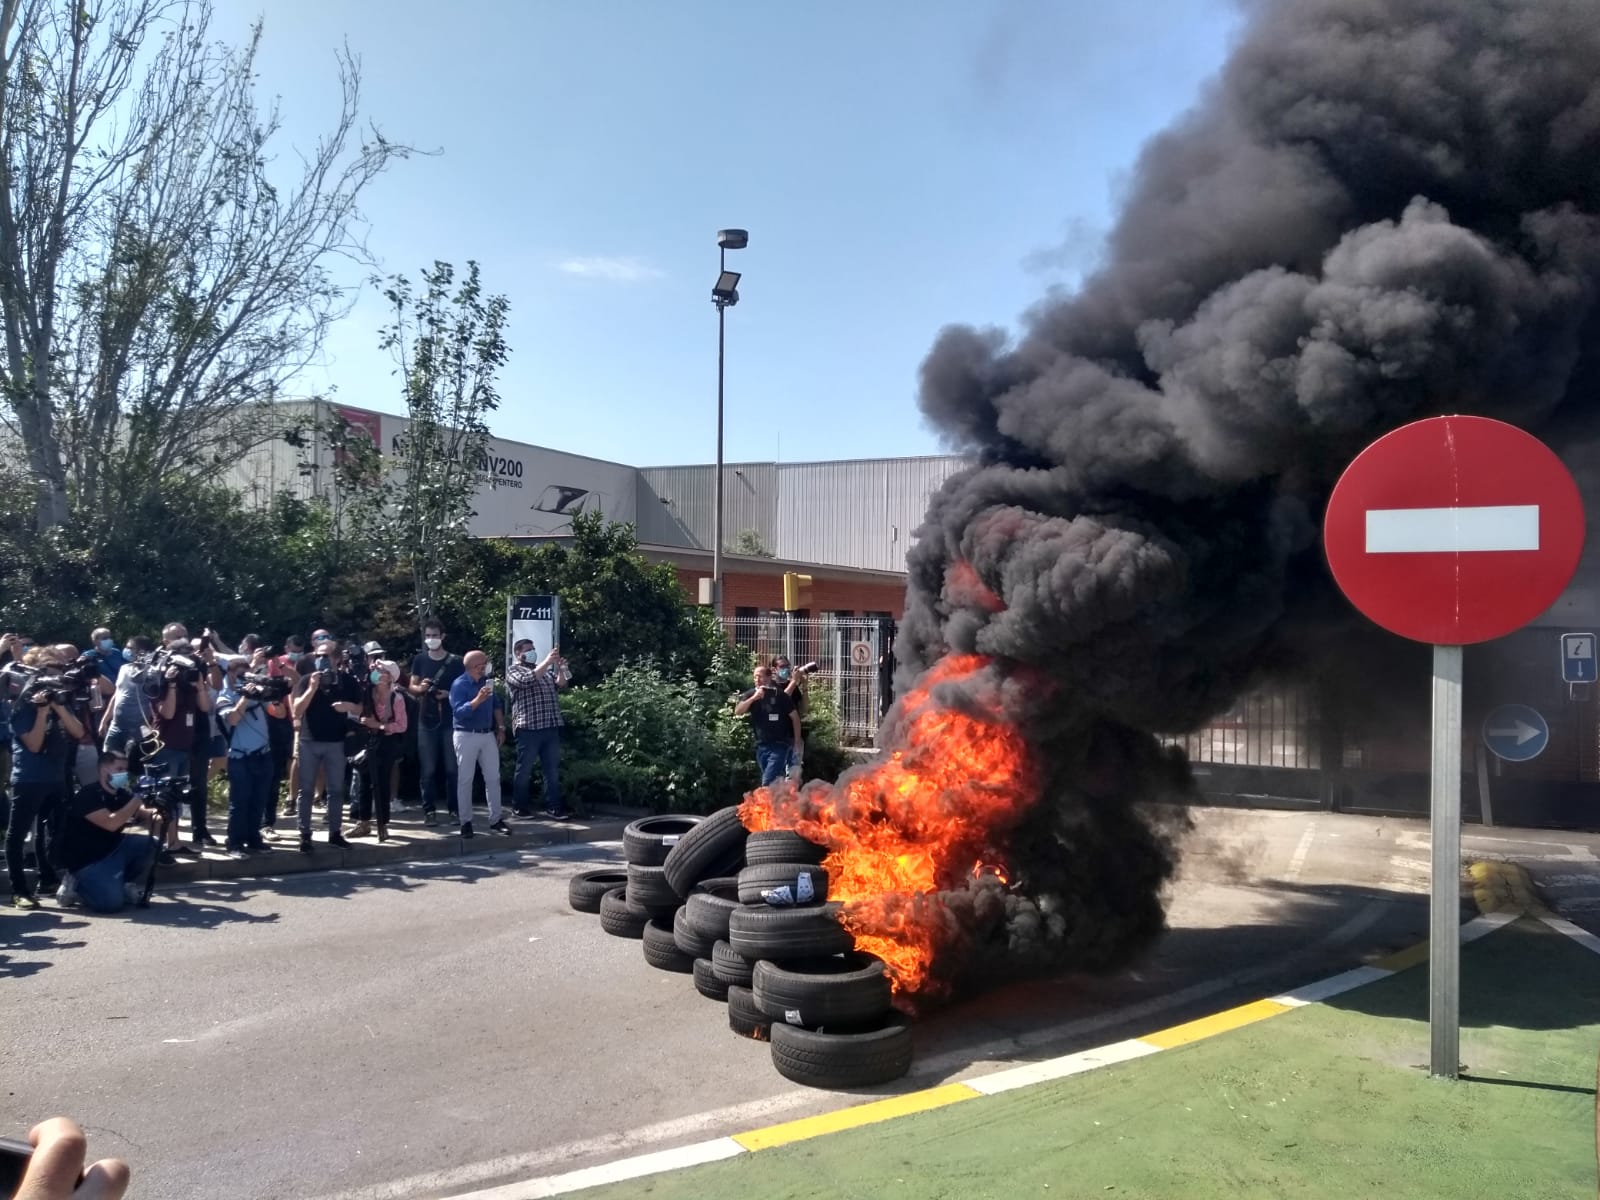 Burning tires outside Nissan's plant in Barcelona, on May 28, 2020 (by Lorcan Doherty)